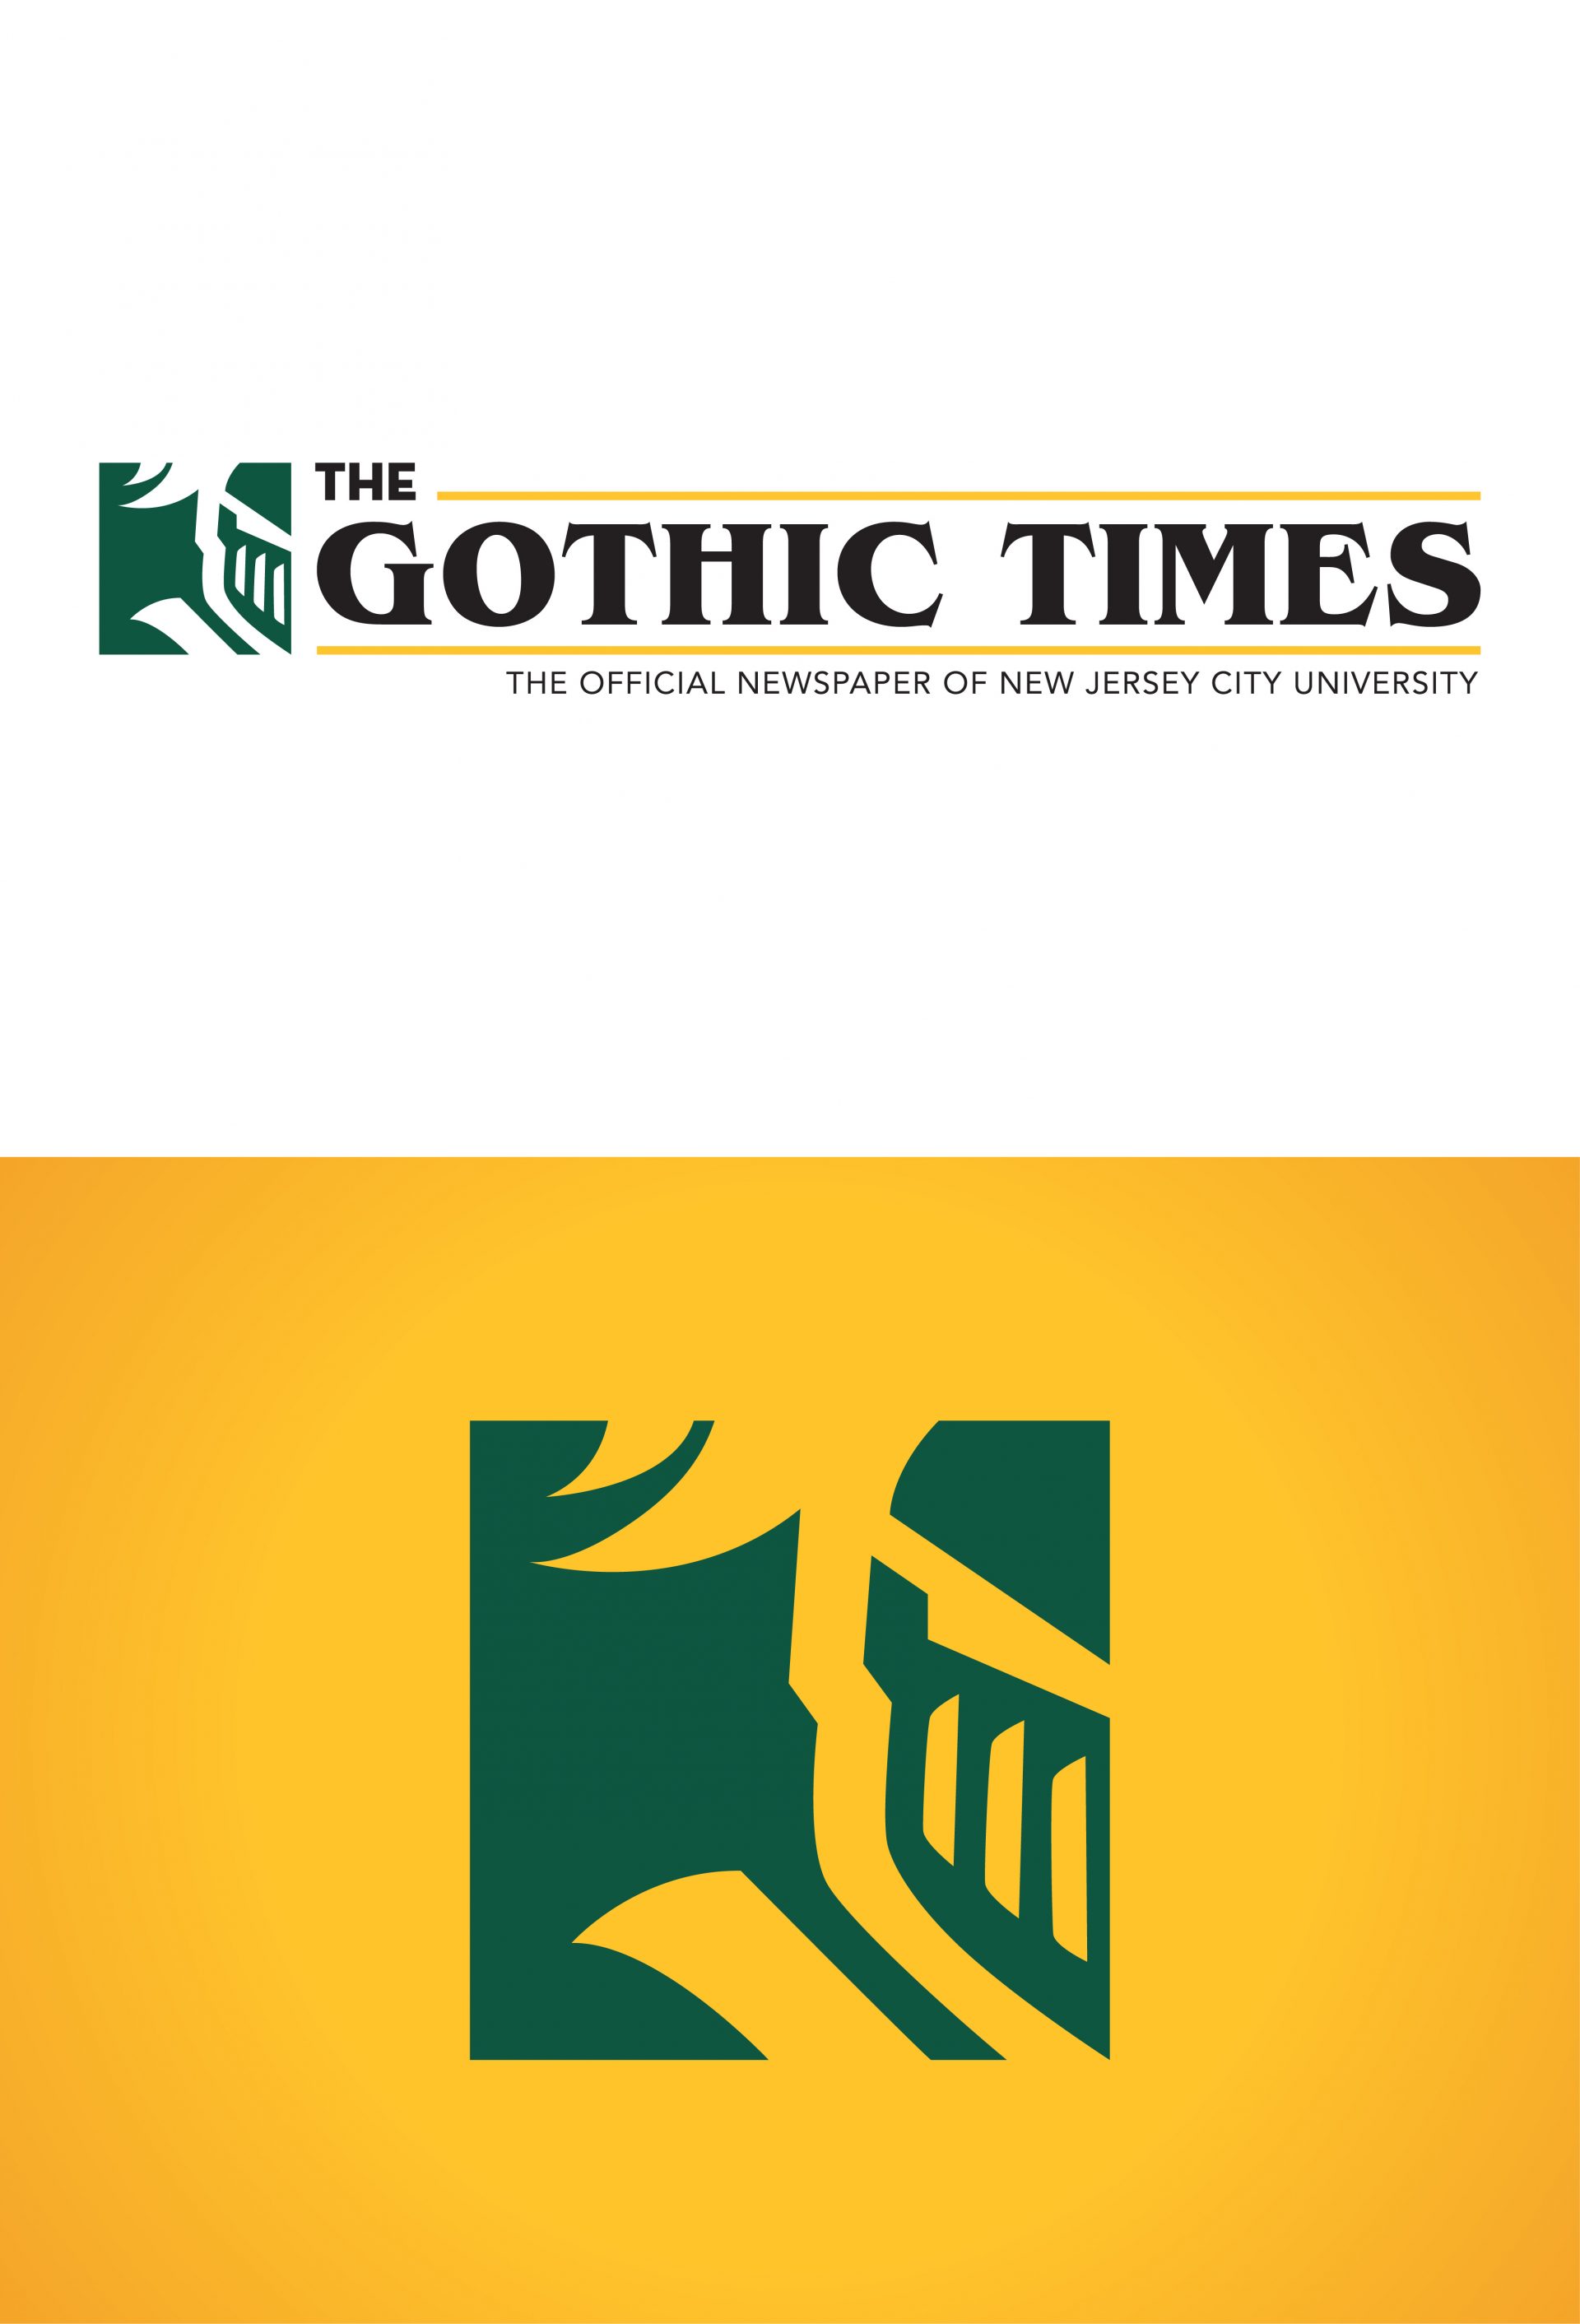 An image of The Gothic Times' branding